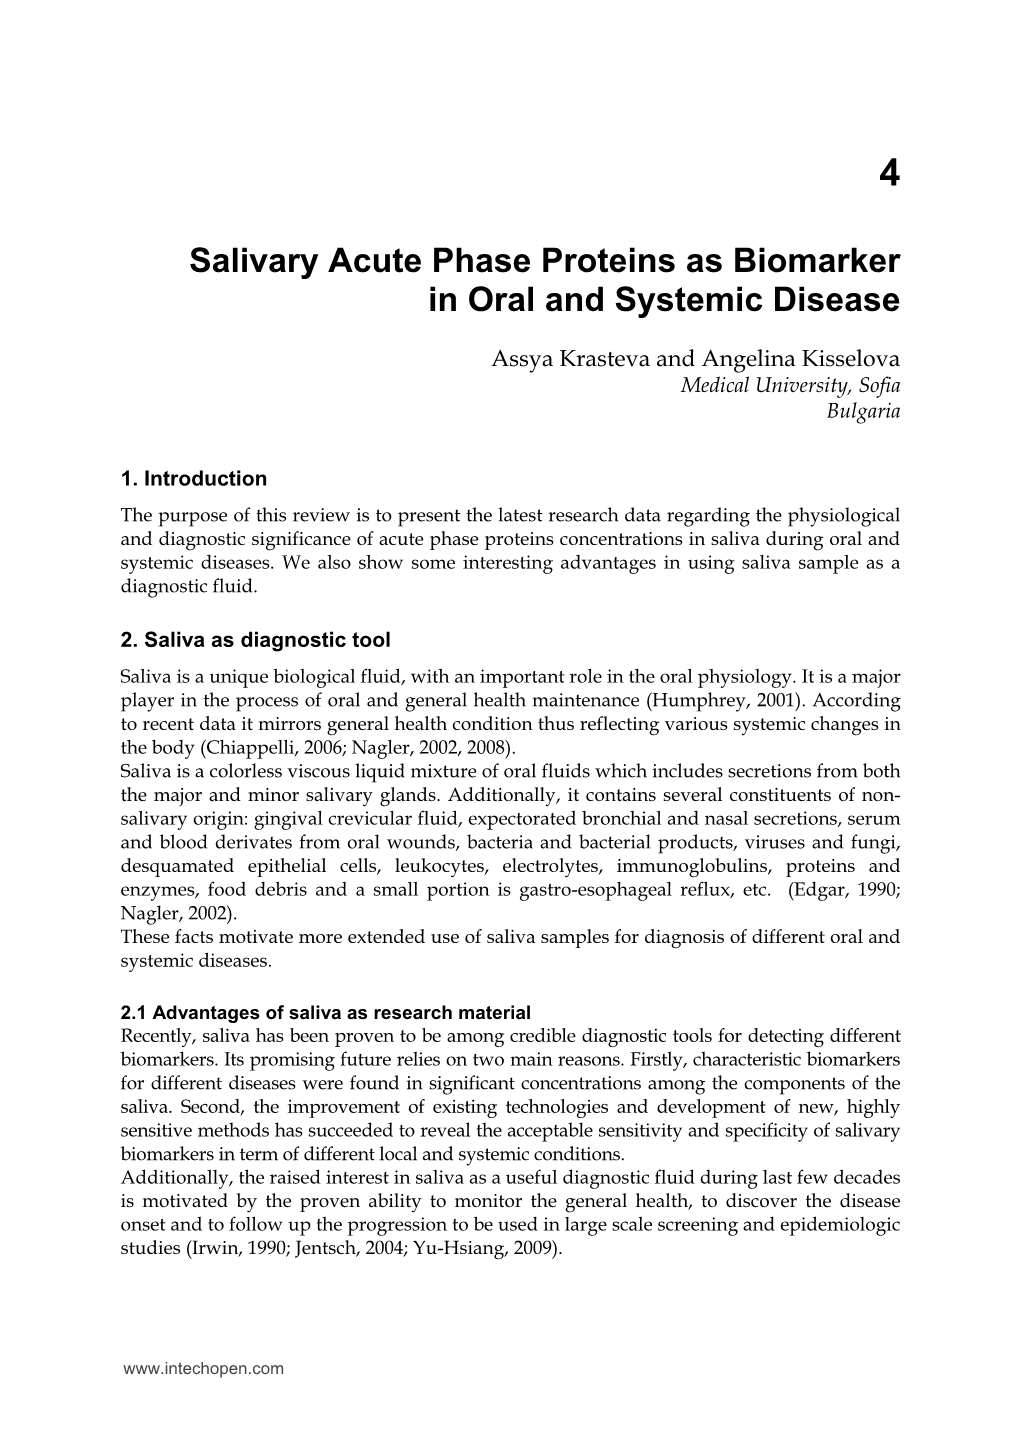 Salivary Acute Phase Proteins As Biomarker in Oral and Systemic Disease